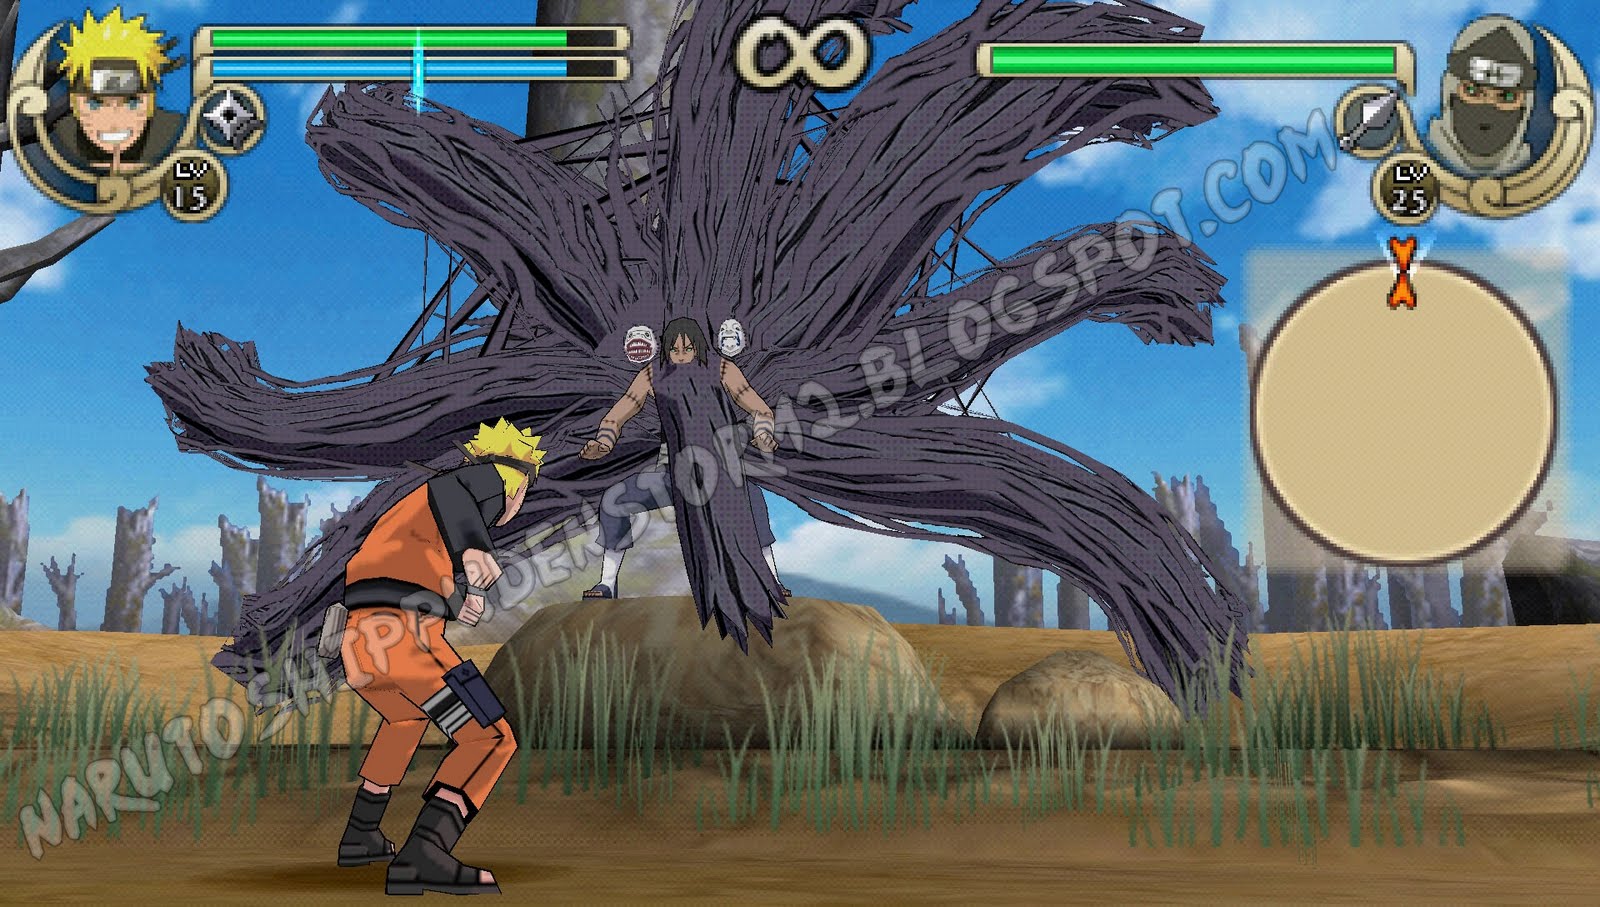 Download Game Ppsspp Naruto Impact